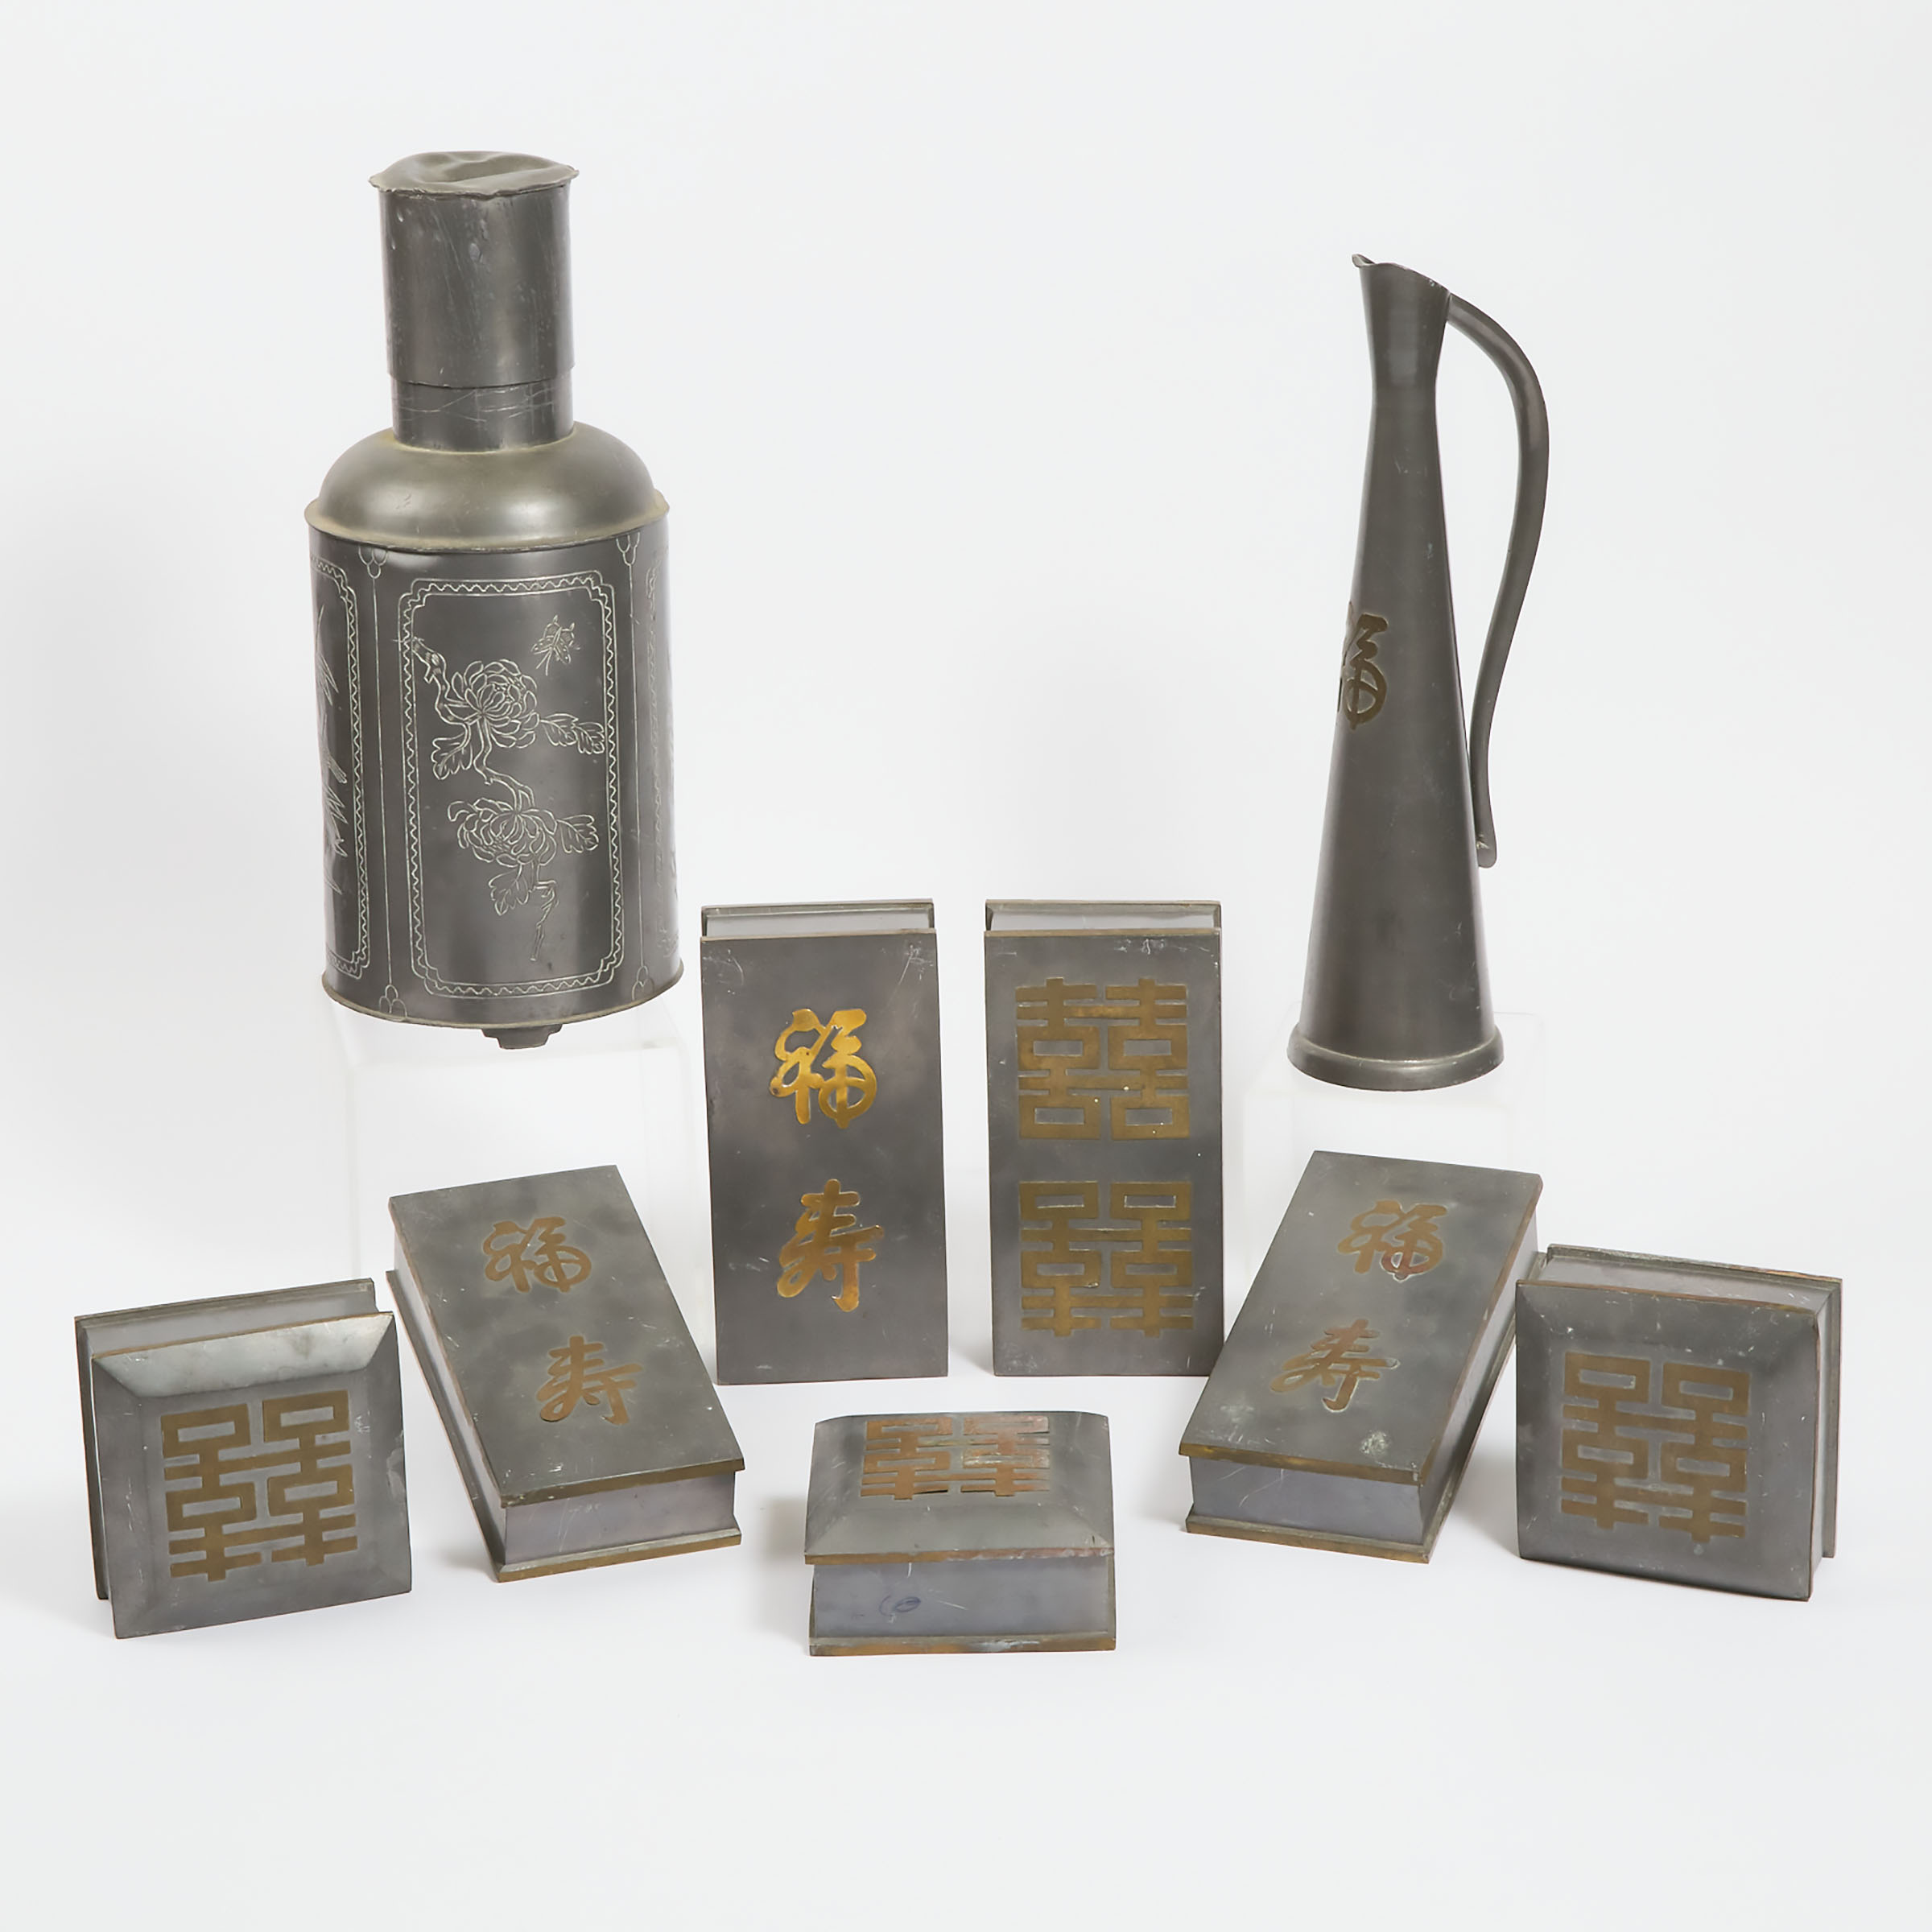 A Group of Nine Chinese Pewter Items, Late Qing/Republican Period